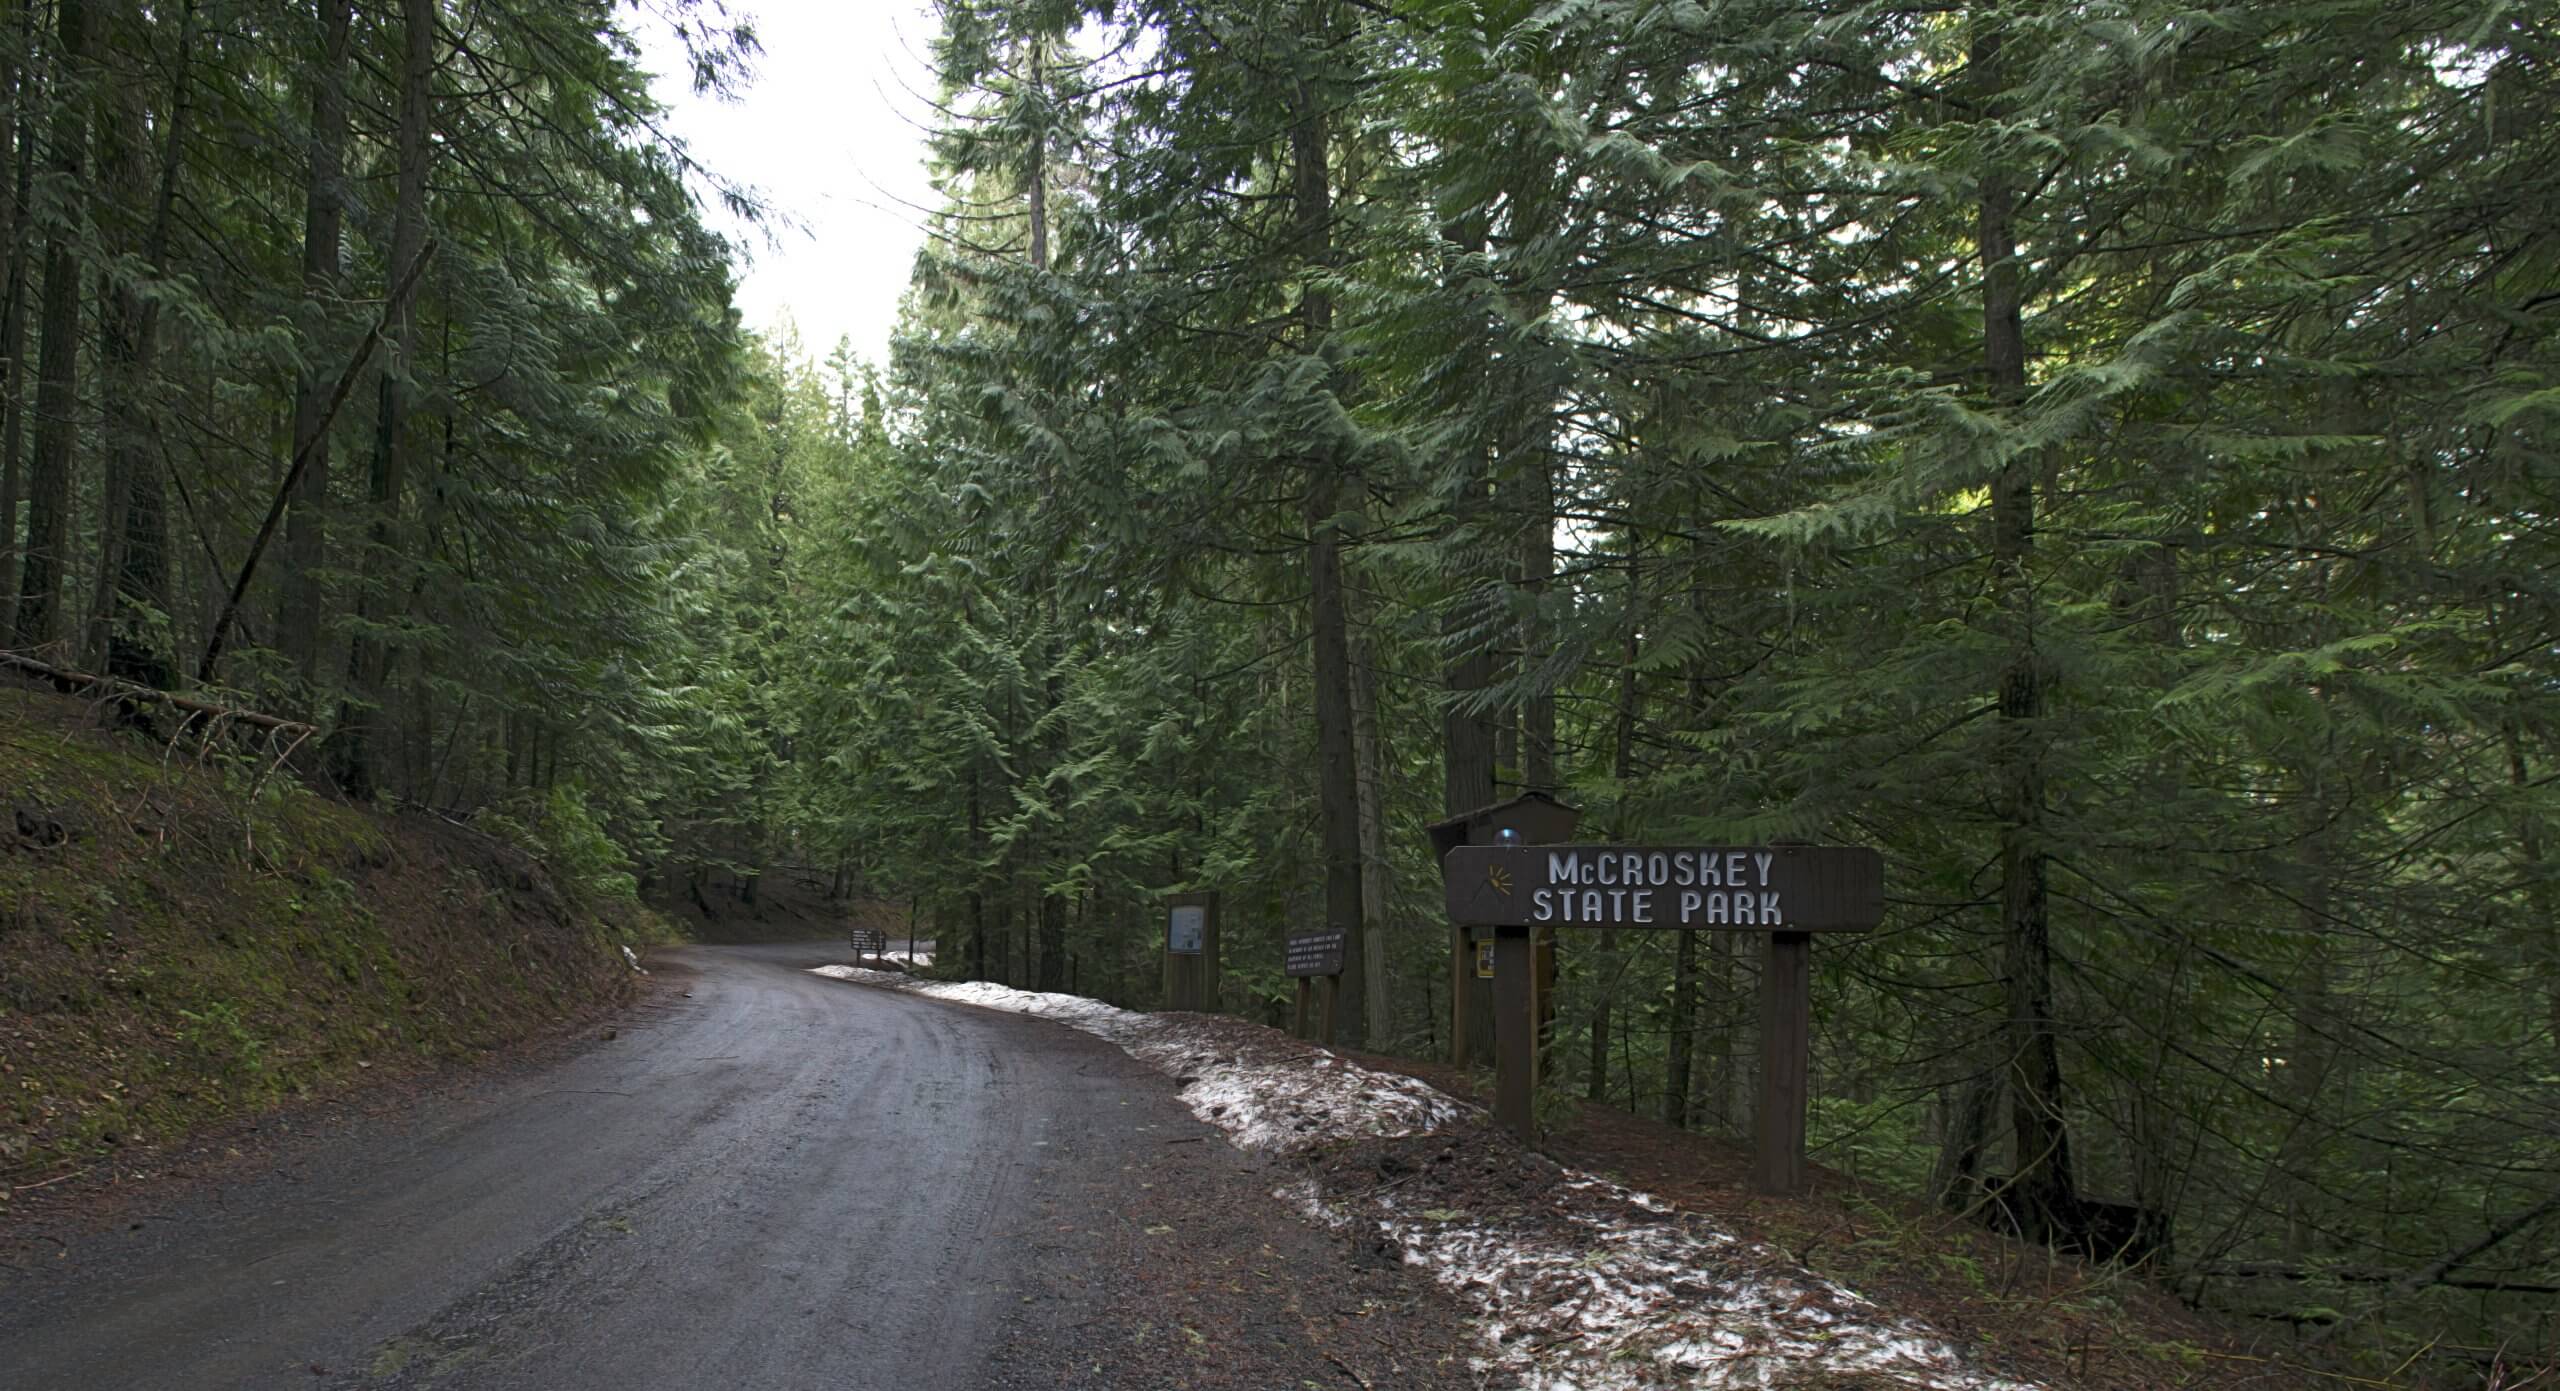 Entrance to McCroskey State Park.